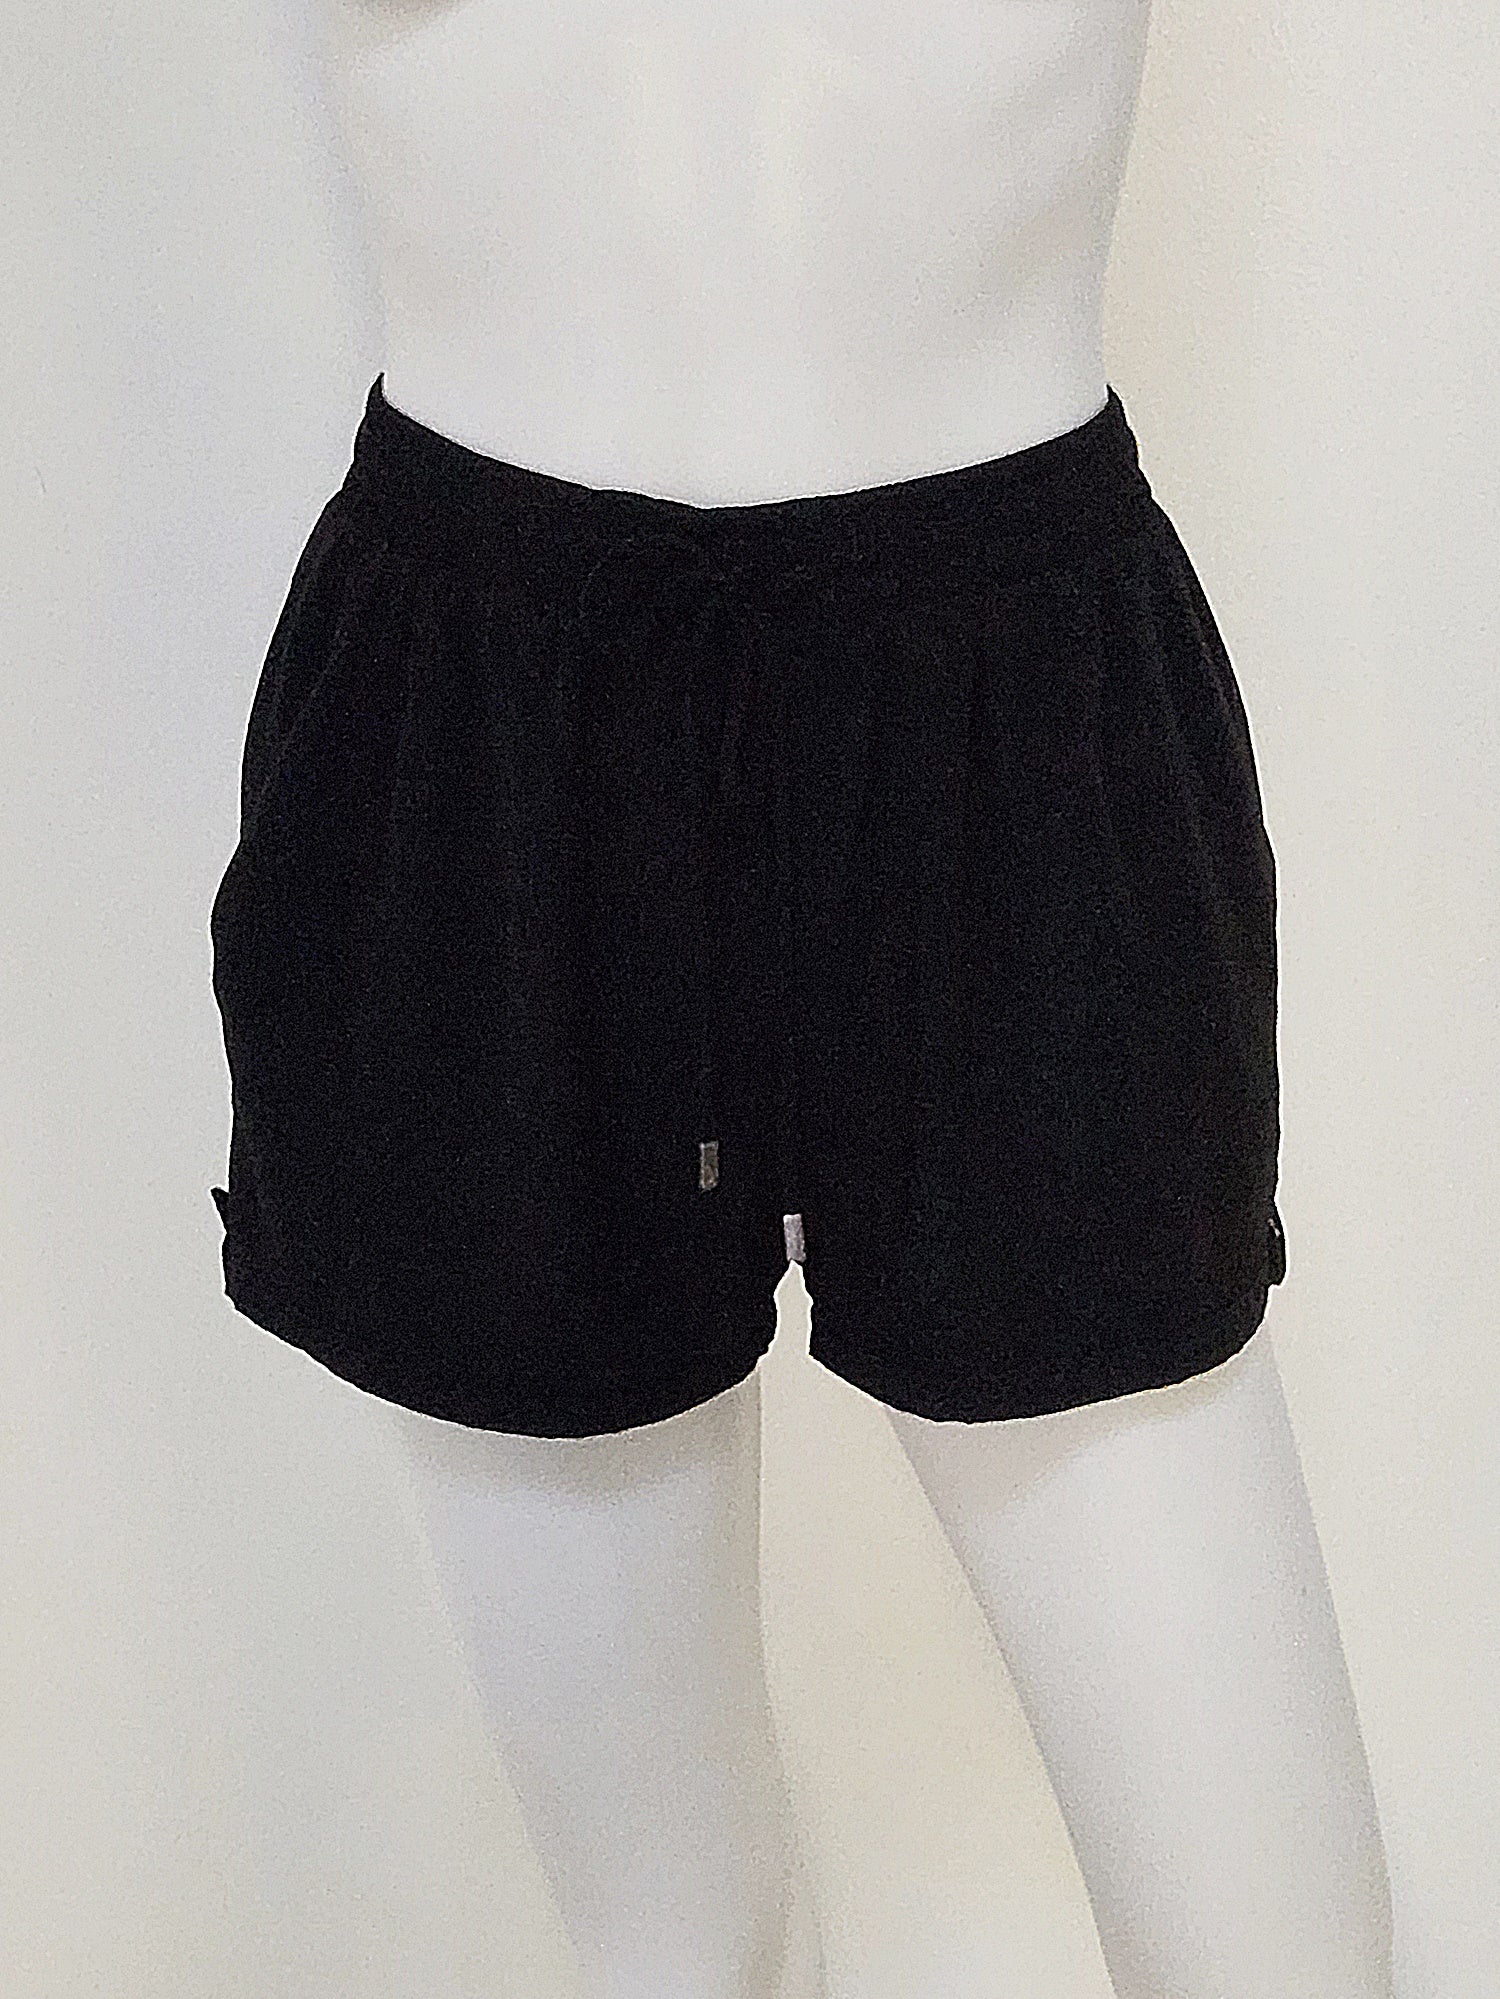 Pull On Shorts Size XS